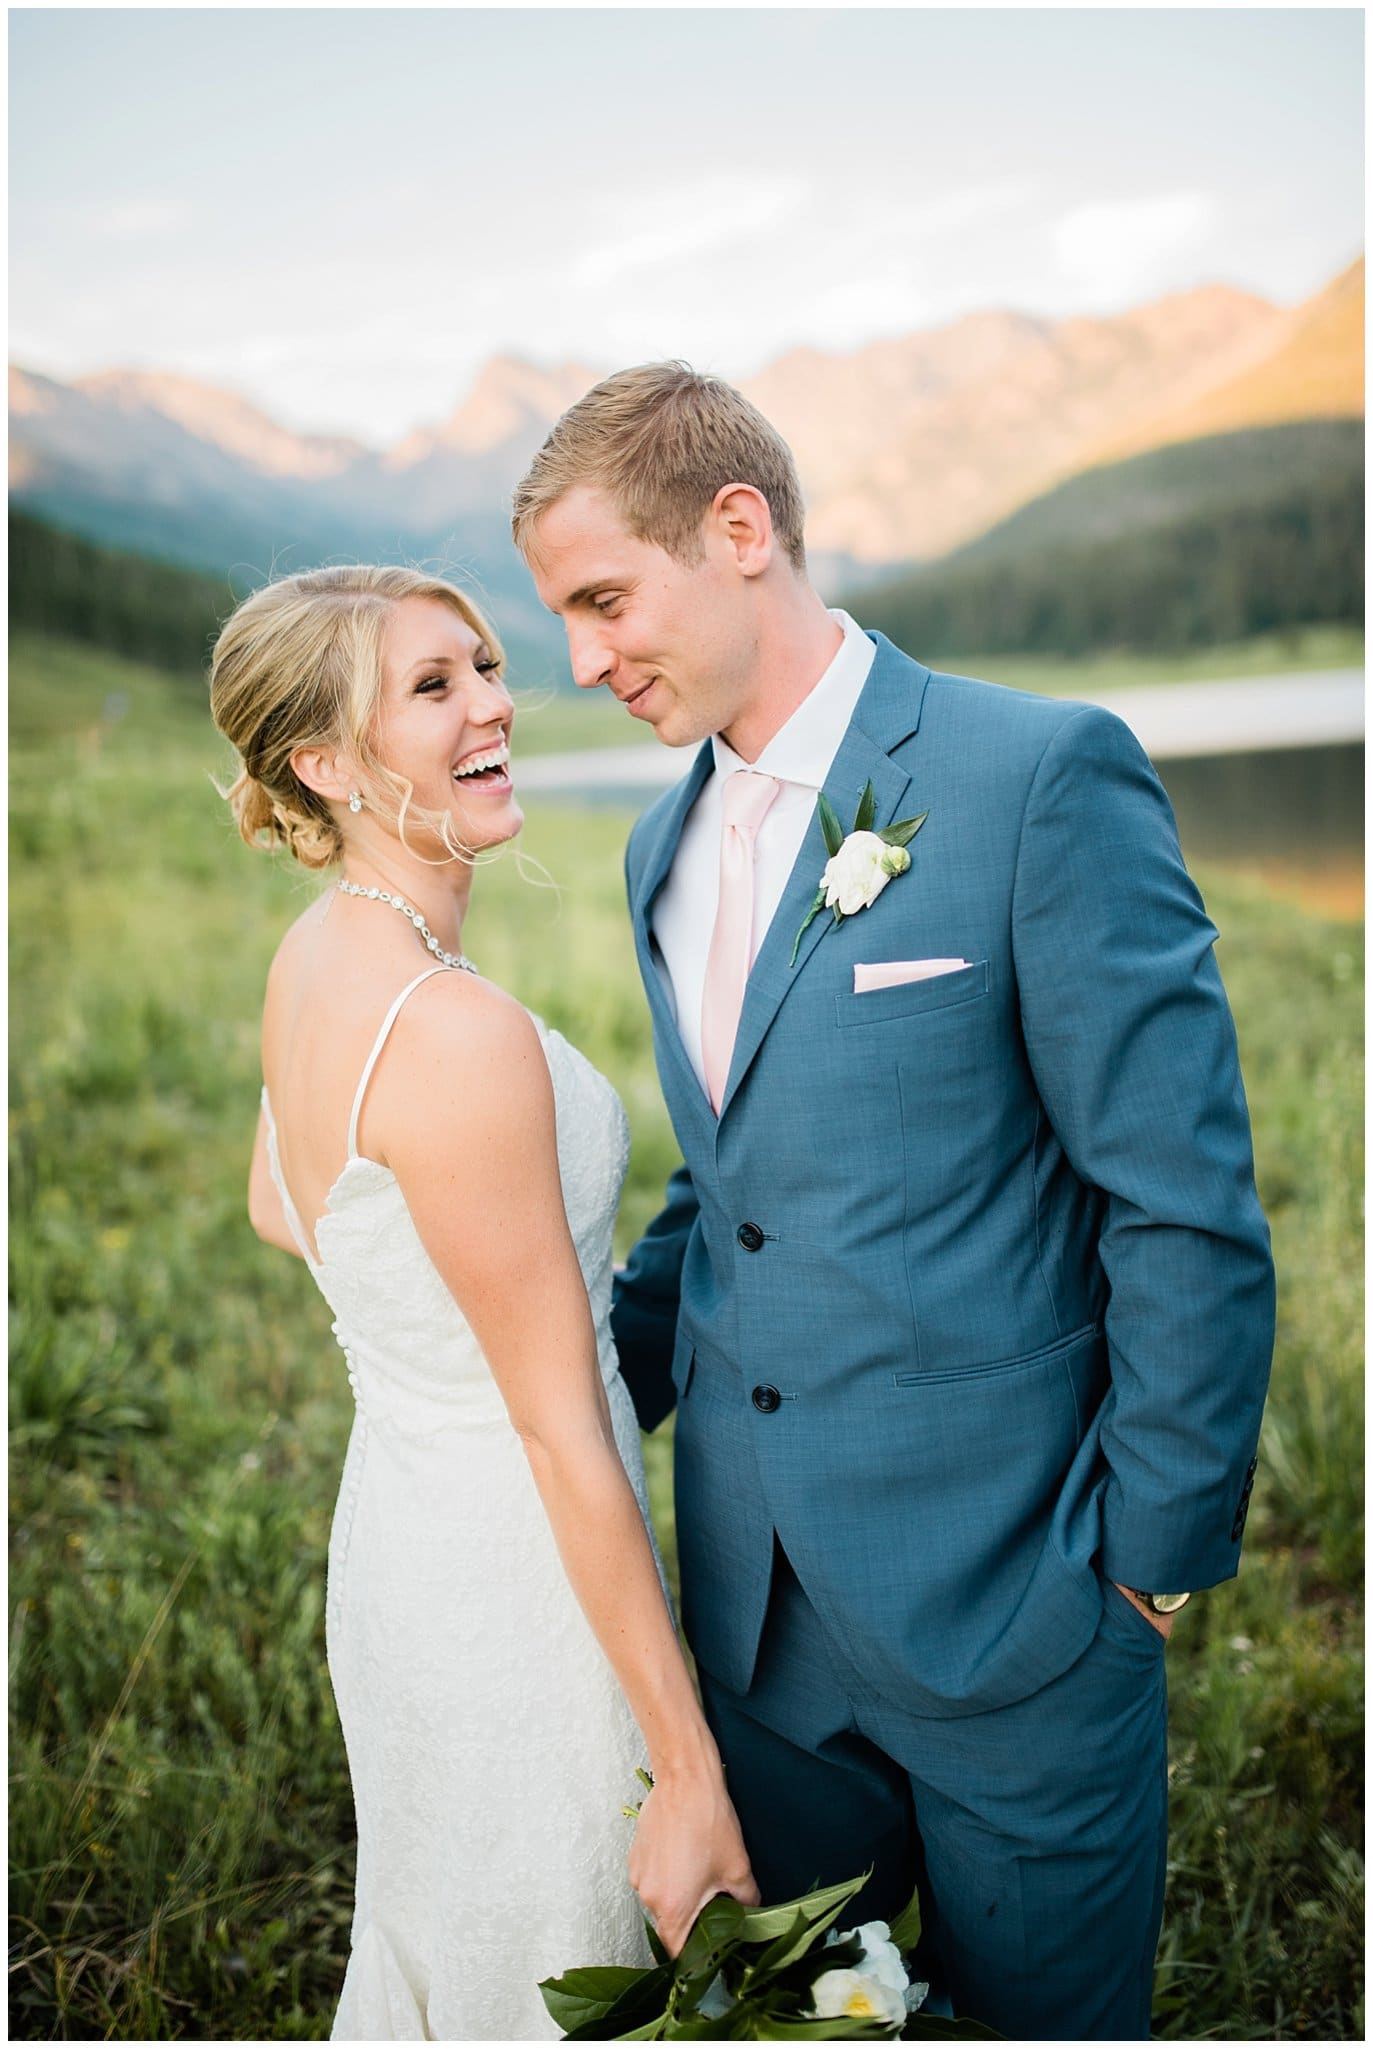 sunset by the lake at Piney River Ranch Summer Wedding by Piney River Ranch wedding photographer Jennie Crate photographer